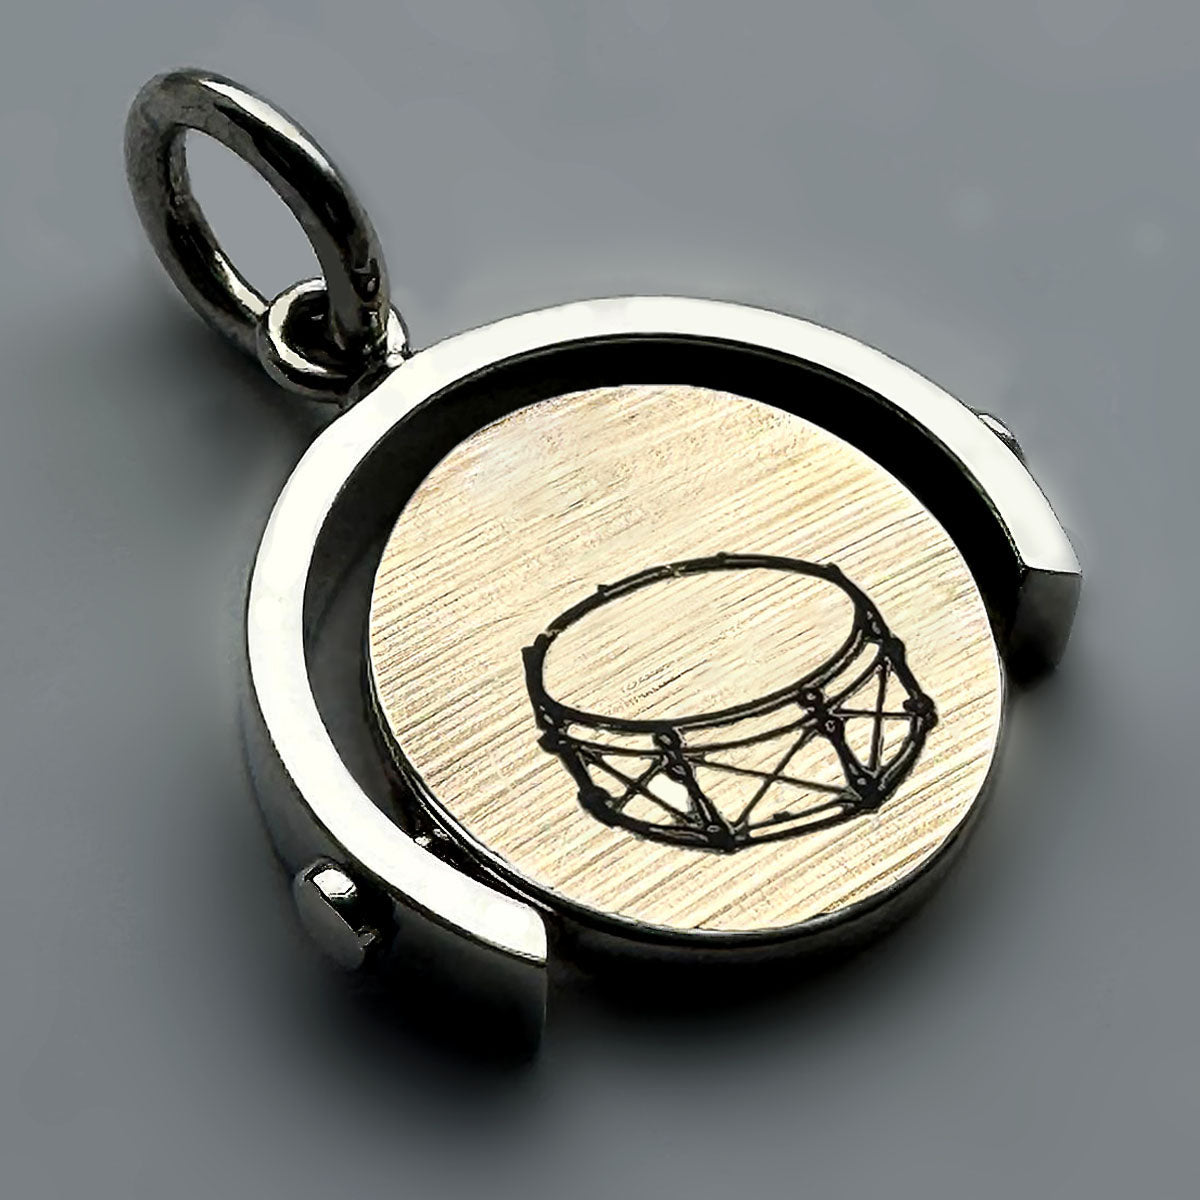 Roger Taylor - Taylored 'Drum' Spinner Pendant Second Batch.